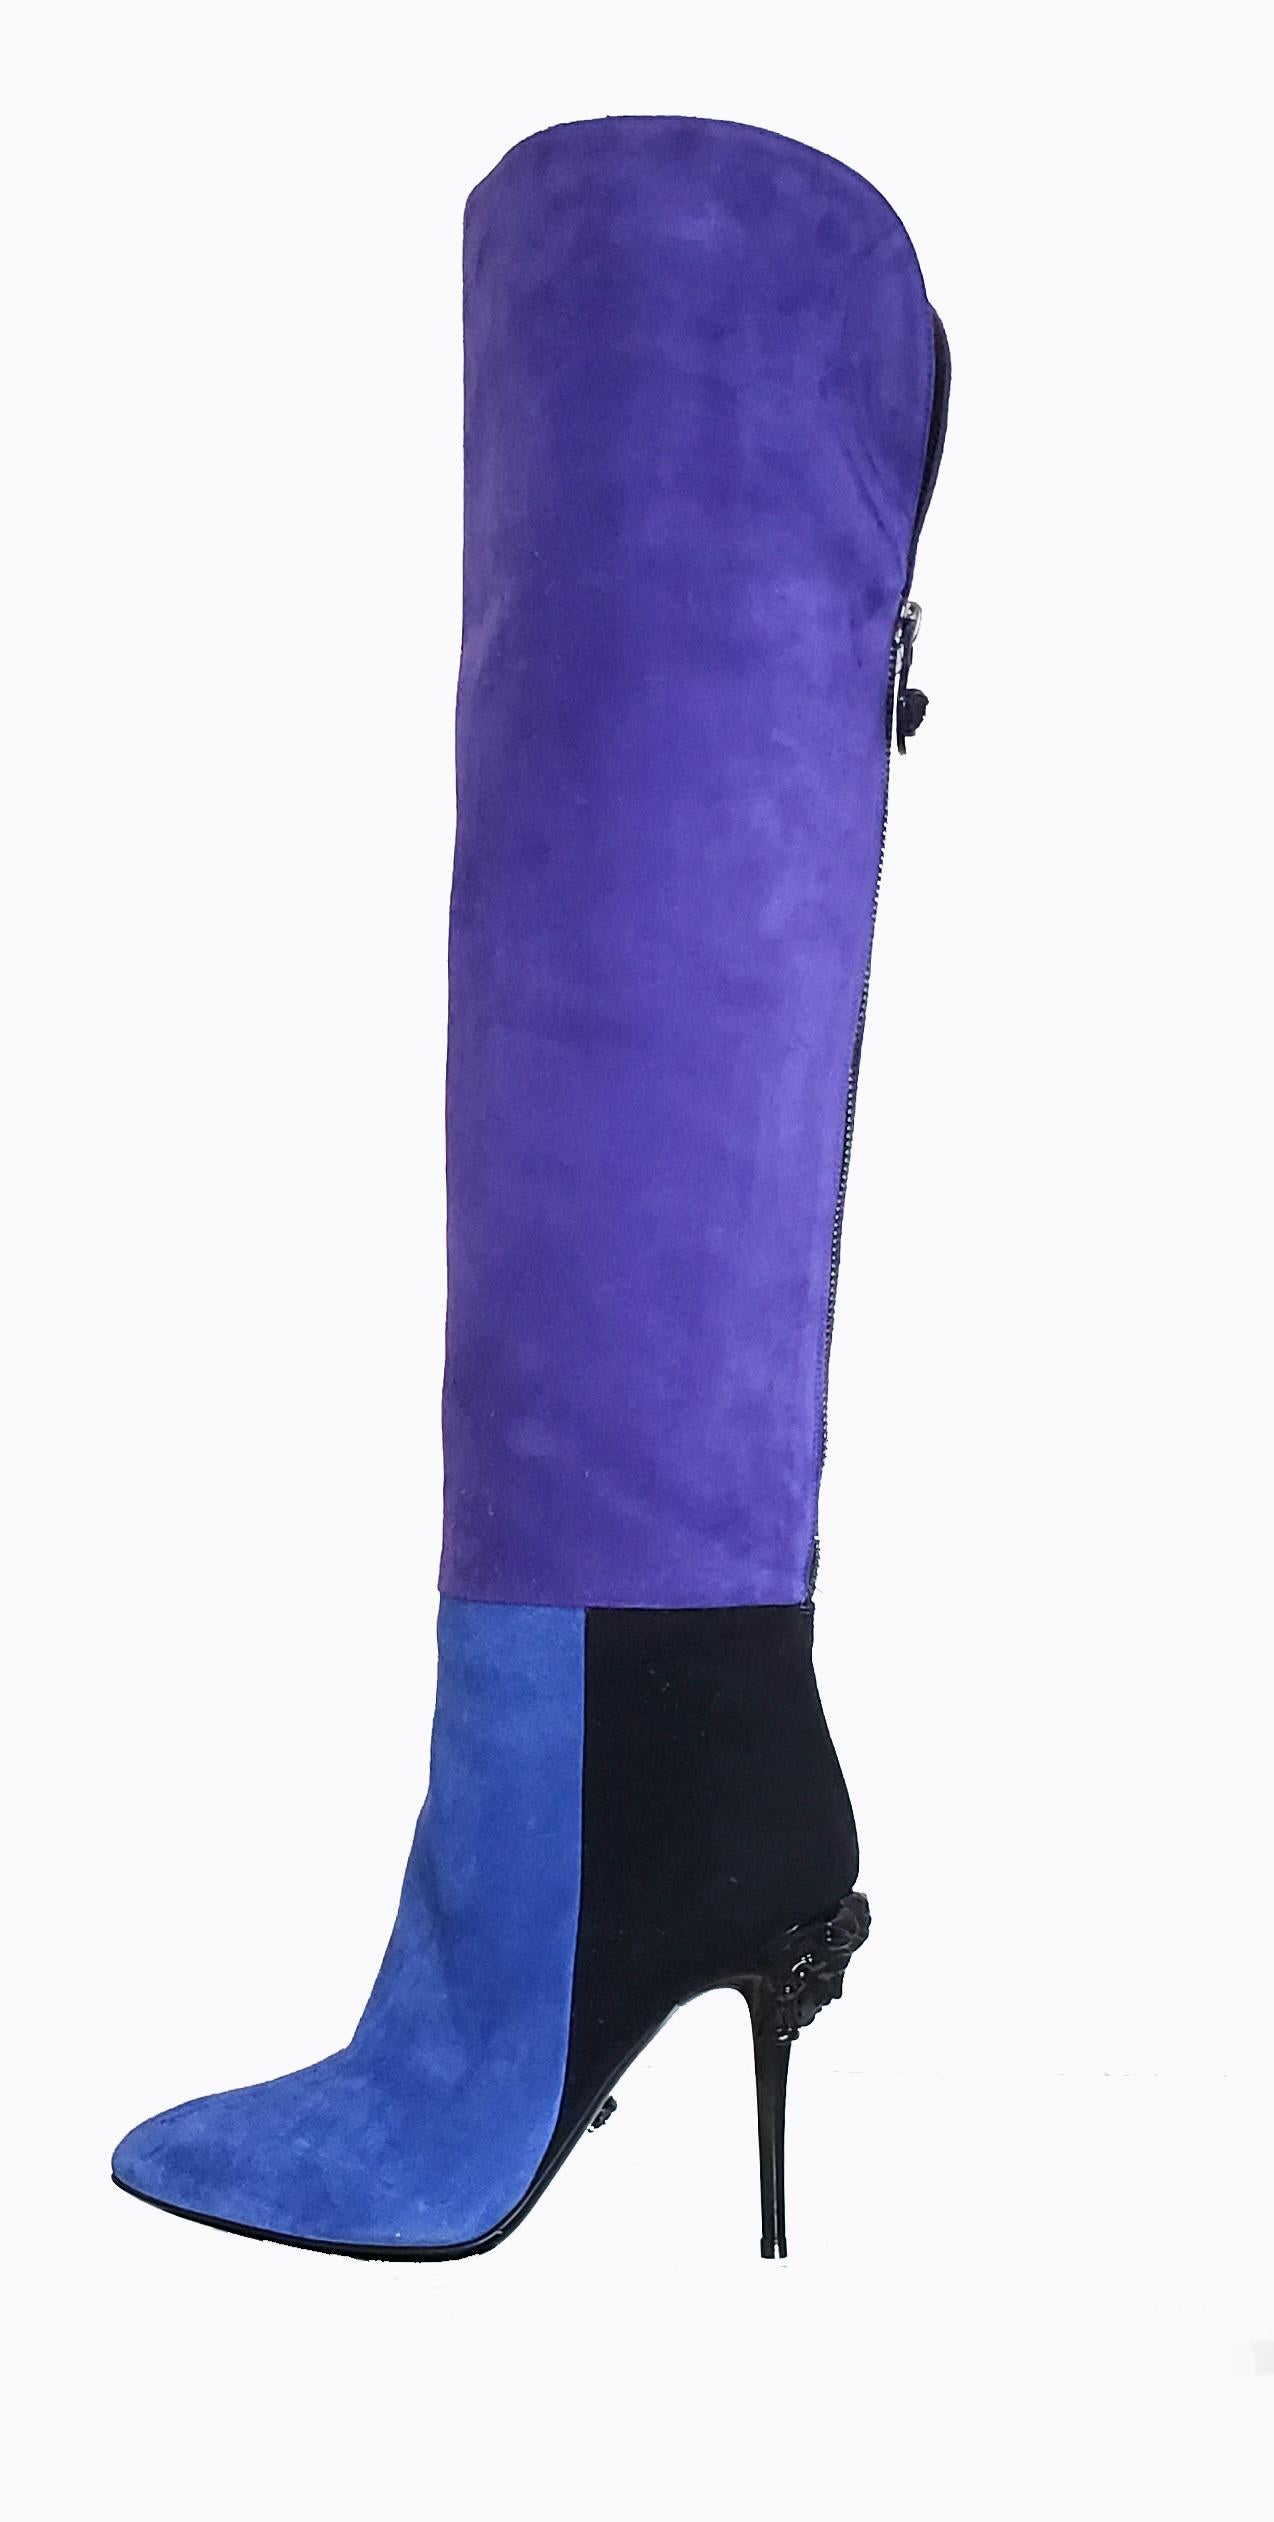 New VERSACE COLOR BLOCK BLUE SUEDE PALAZZO BOOTS 37 - 7 For Sale 1